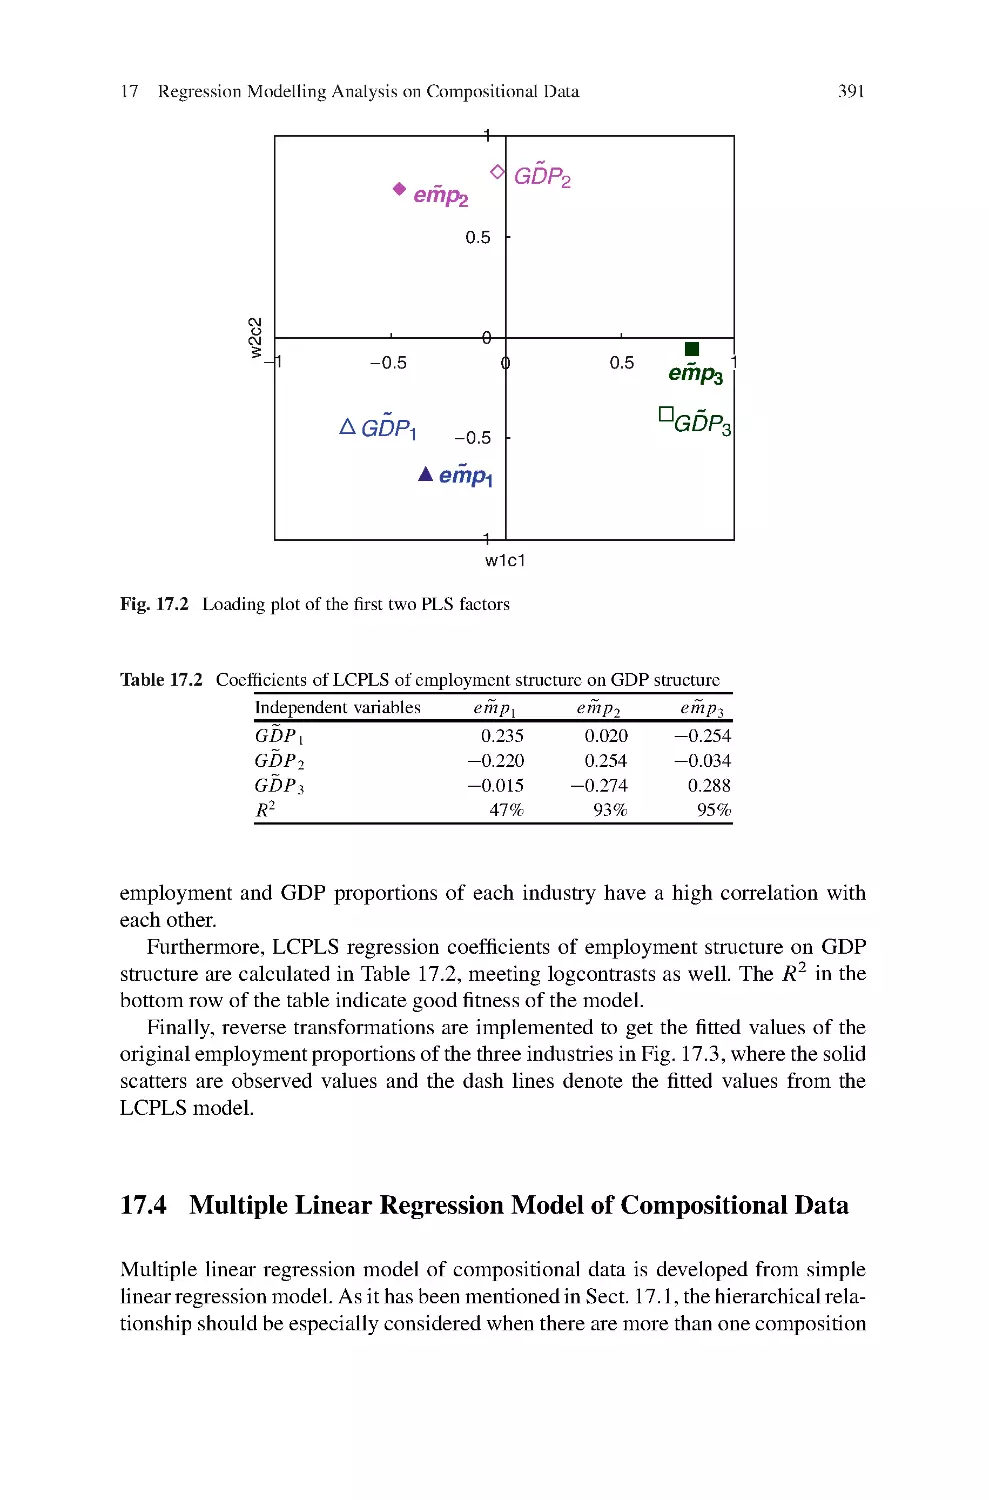 17.4 Multiple Linear Regression Model of Compositional Data